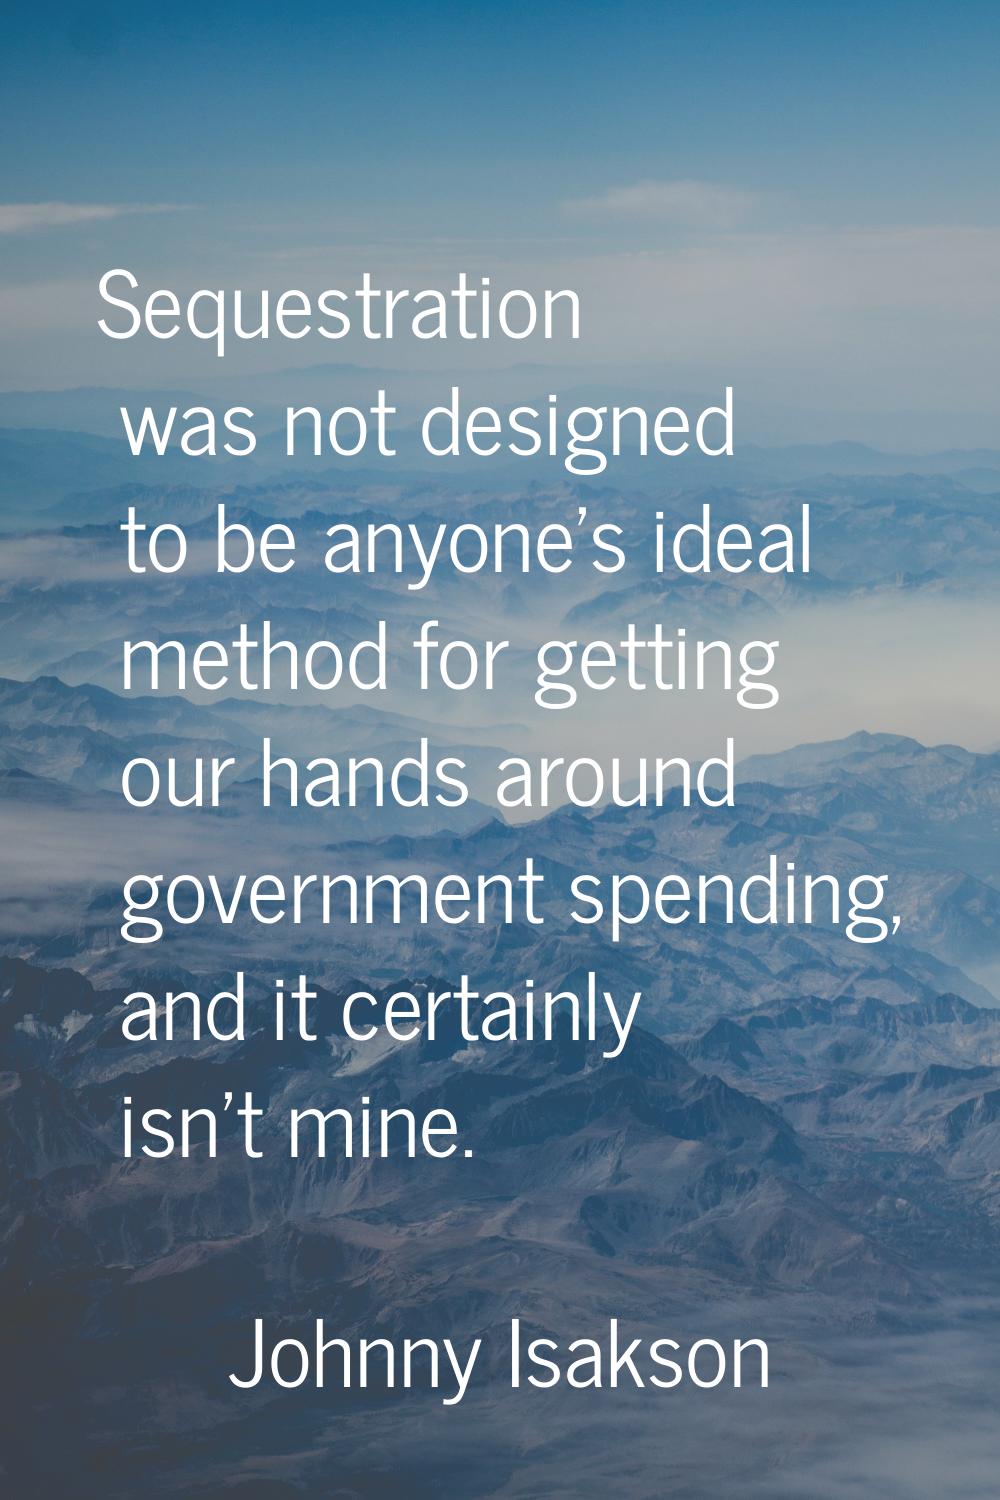 Sequestration was not designed to be anyone's ideal method for getting our hands around government 